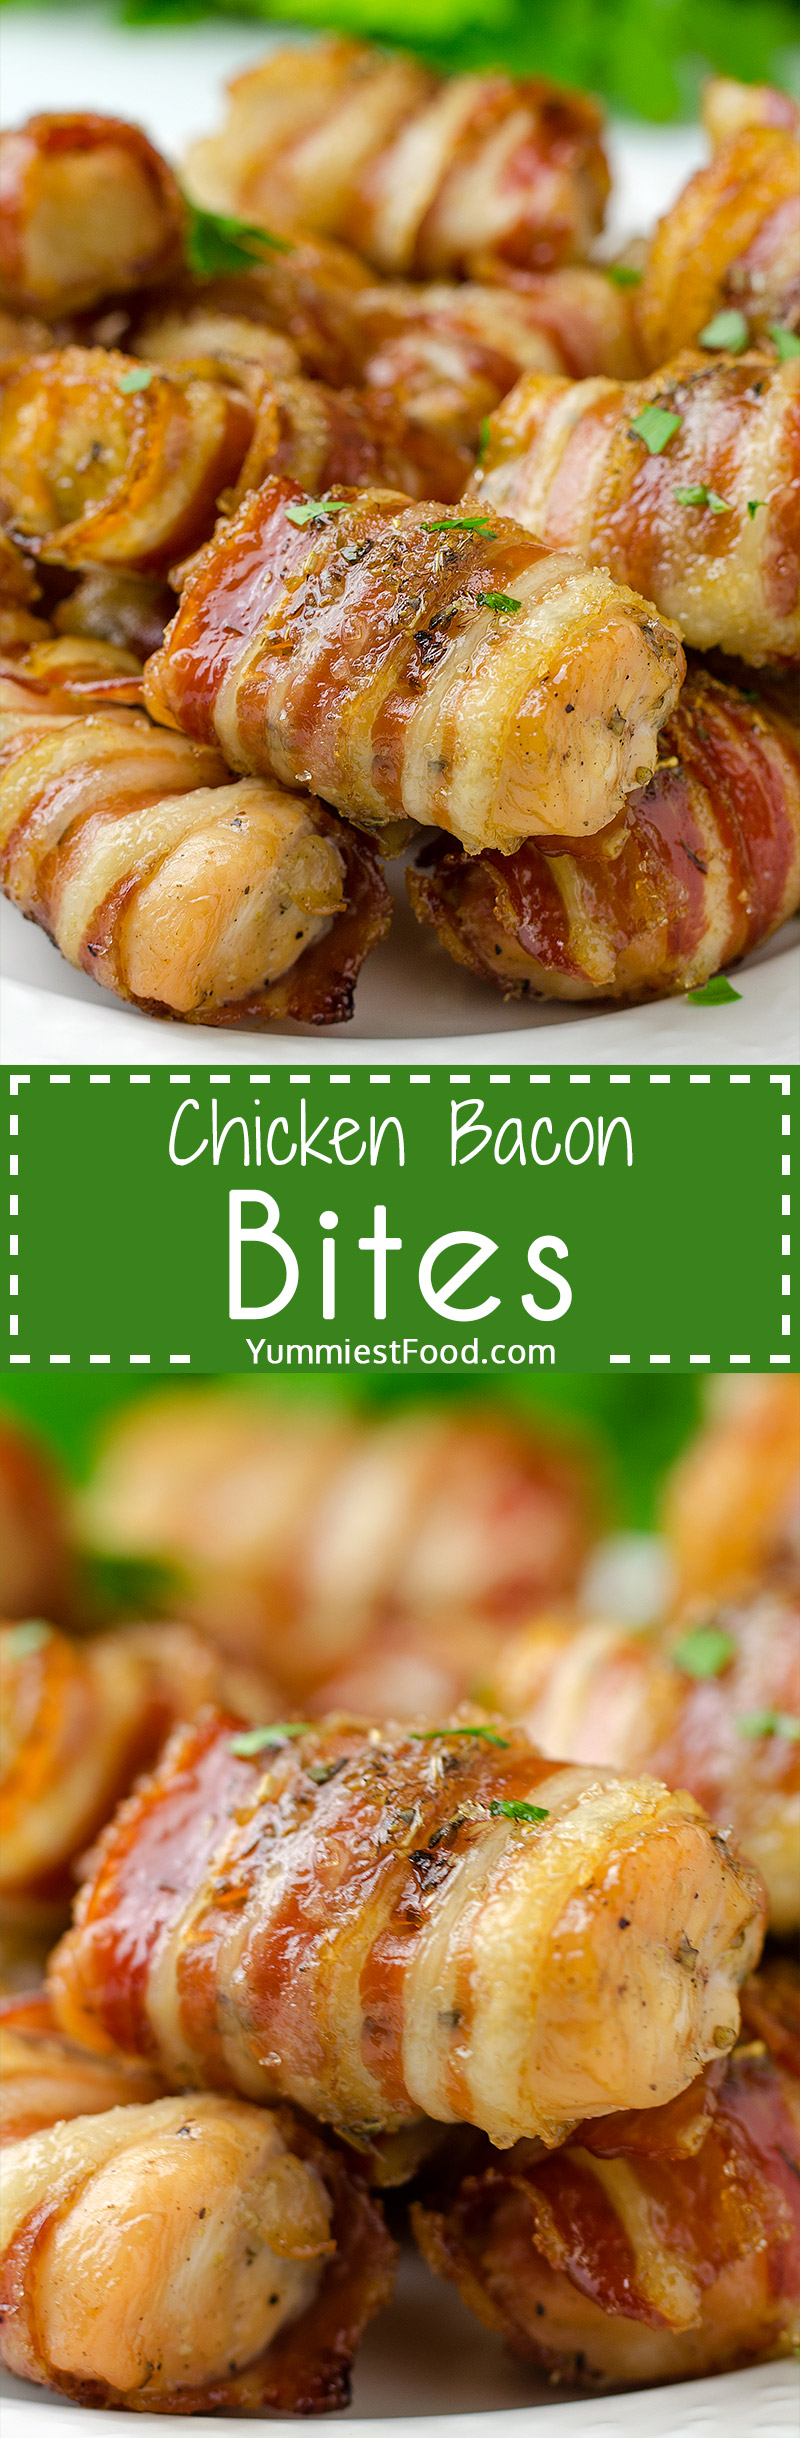 EASY AND SWEET CHICKEN BACON BITES - Easy way of preparing chicken and bacon